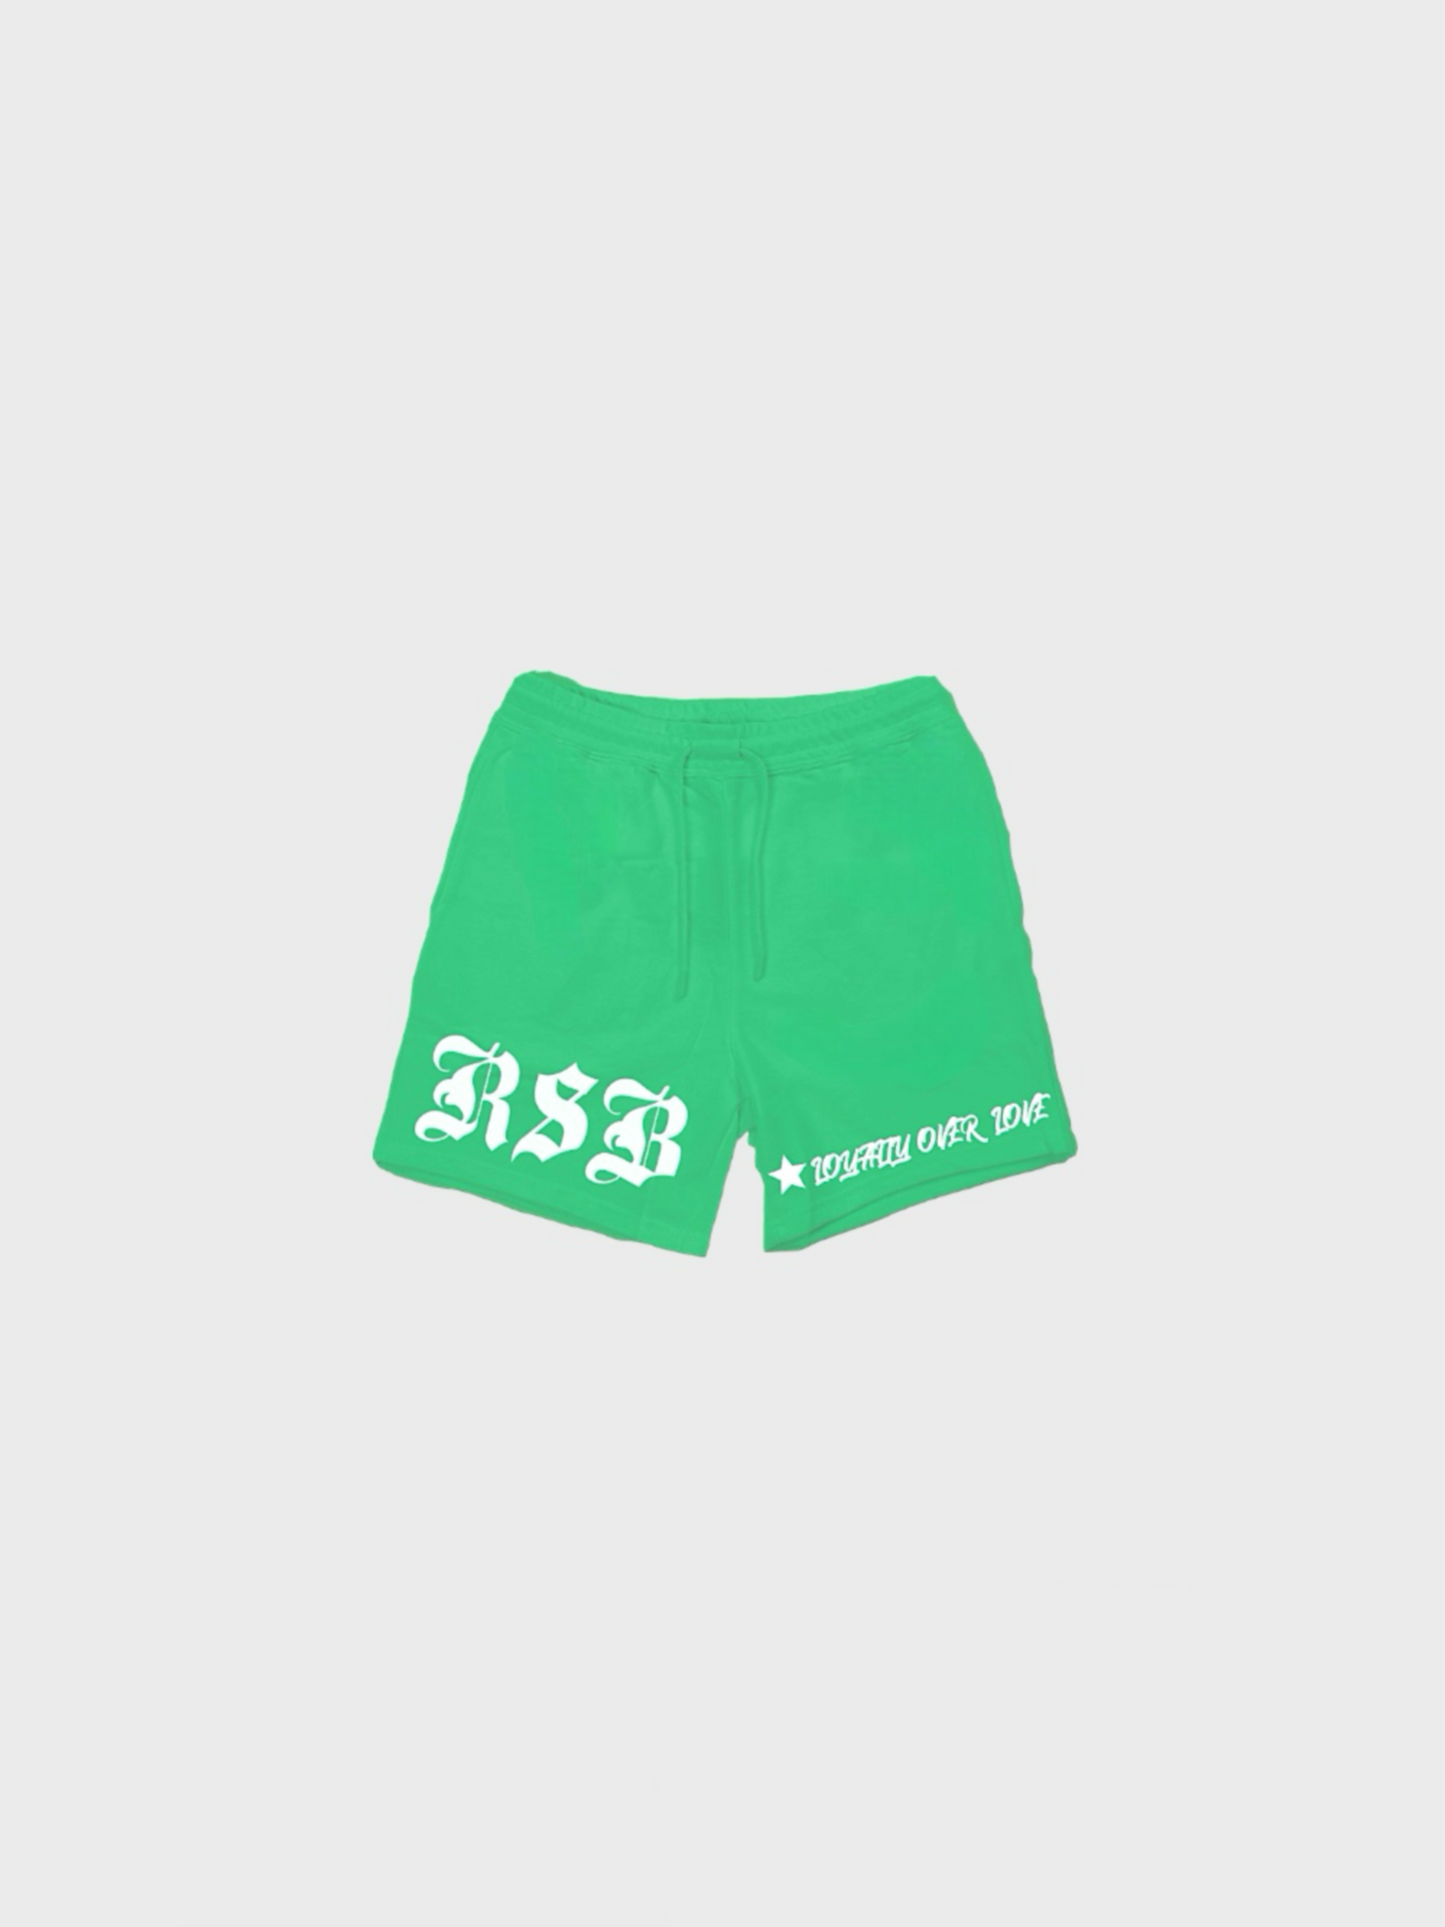 LOYALTY OVER LOVE SHORTS- KELLY GREEN/WHITE